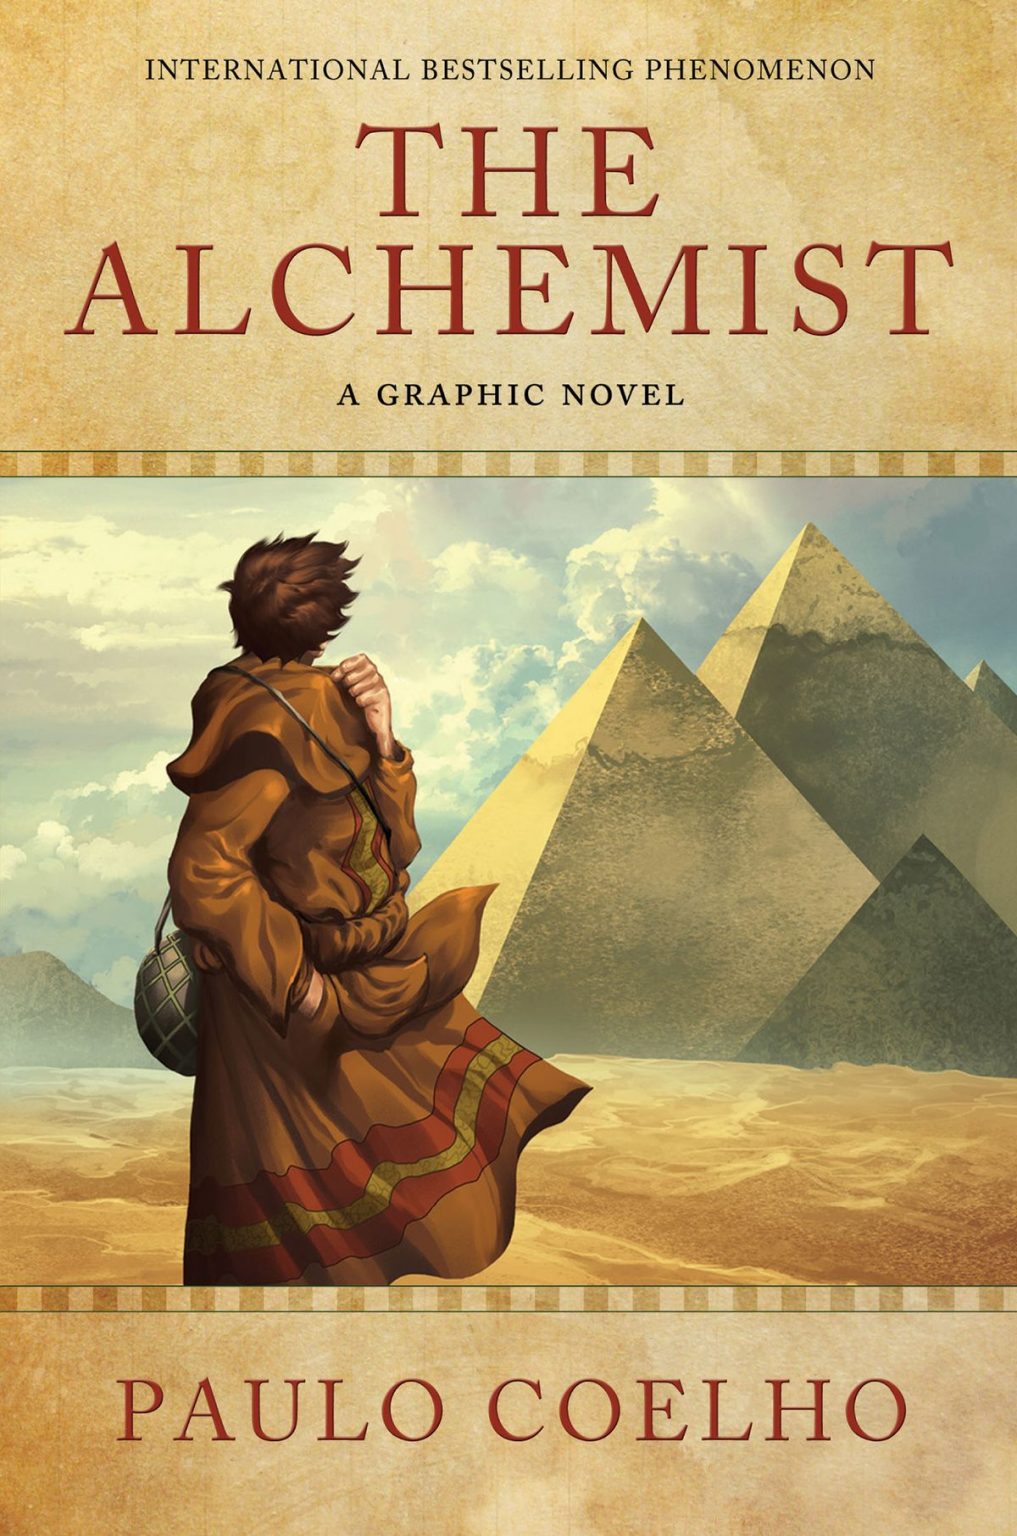 book reviews on the alchemist